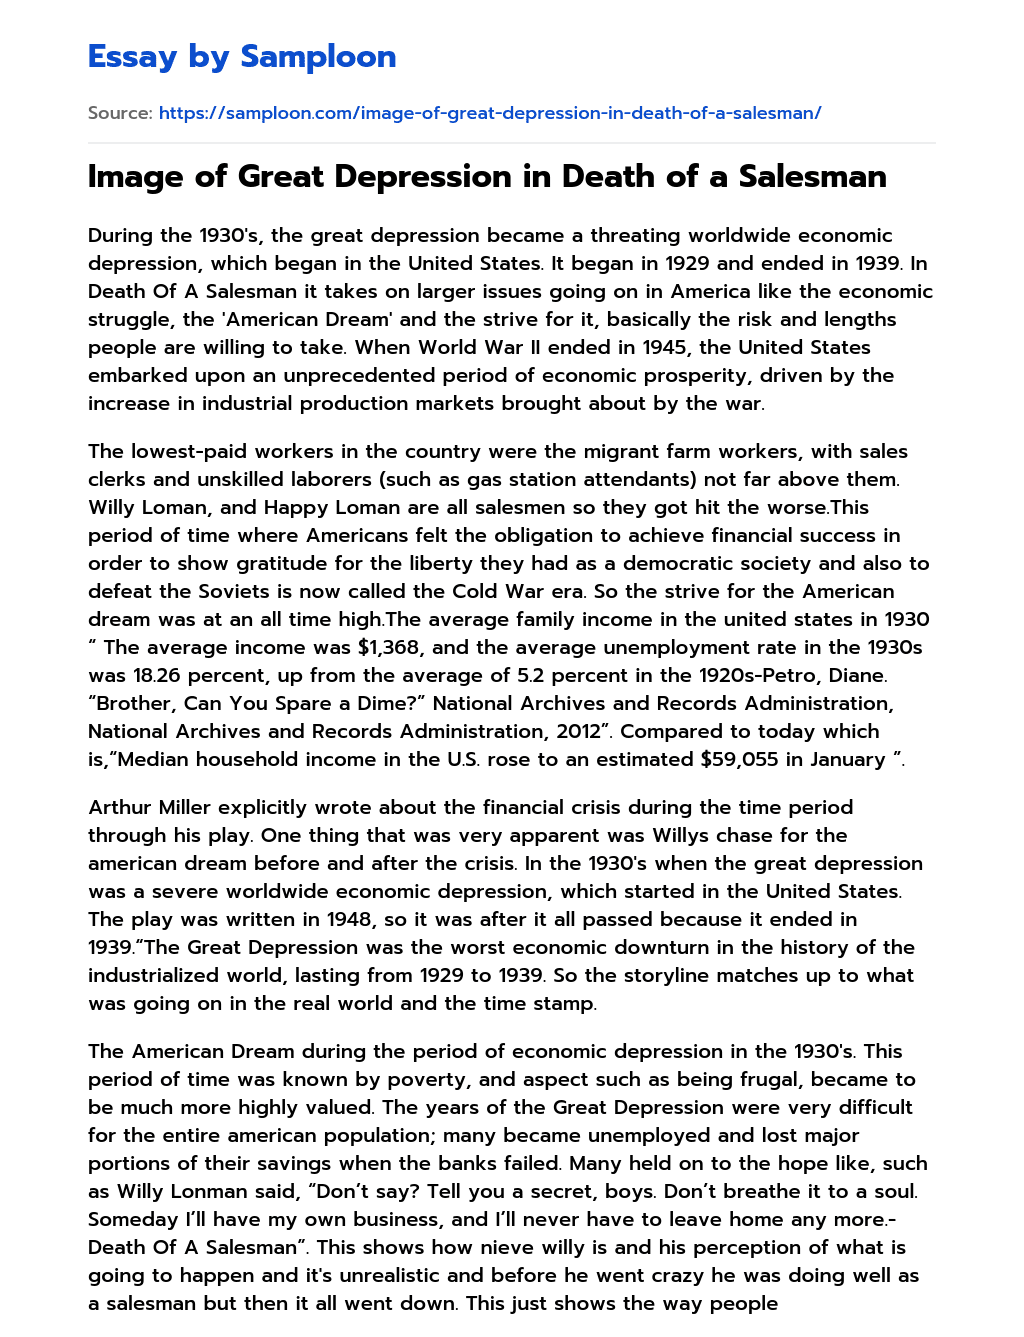 Image of Great Depression in Death of a Salesman essay